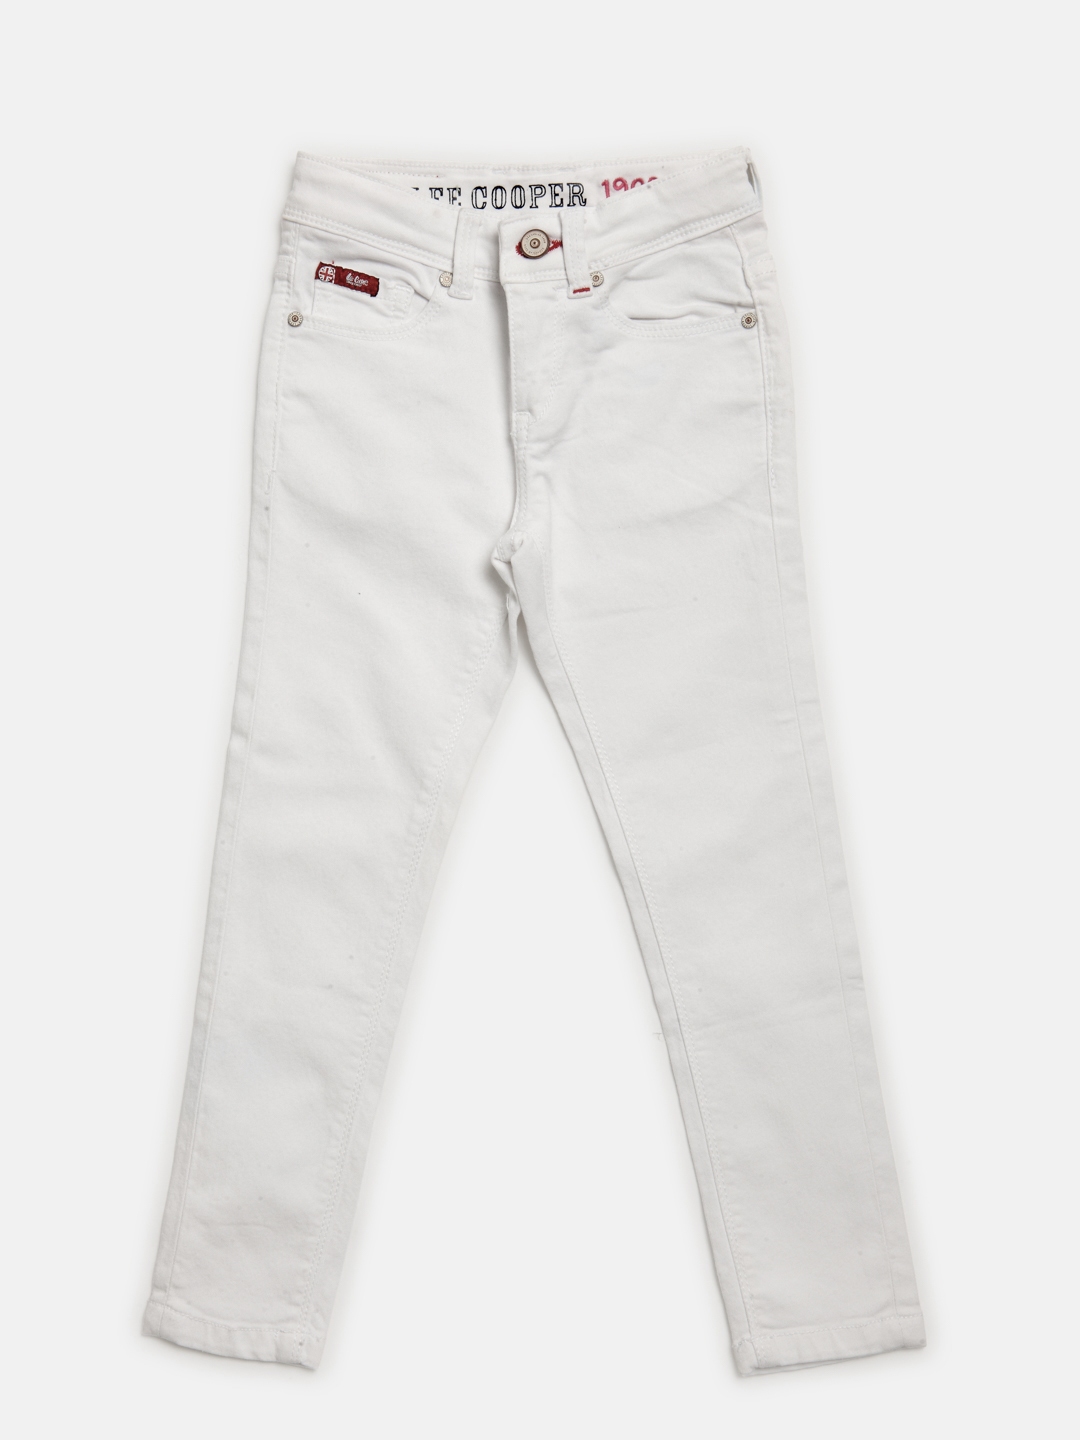 Buy Lee Cooper Girls White Slim Fit Mid Rise Clean Look Stretchable ...